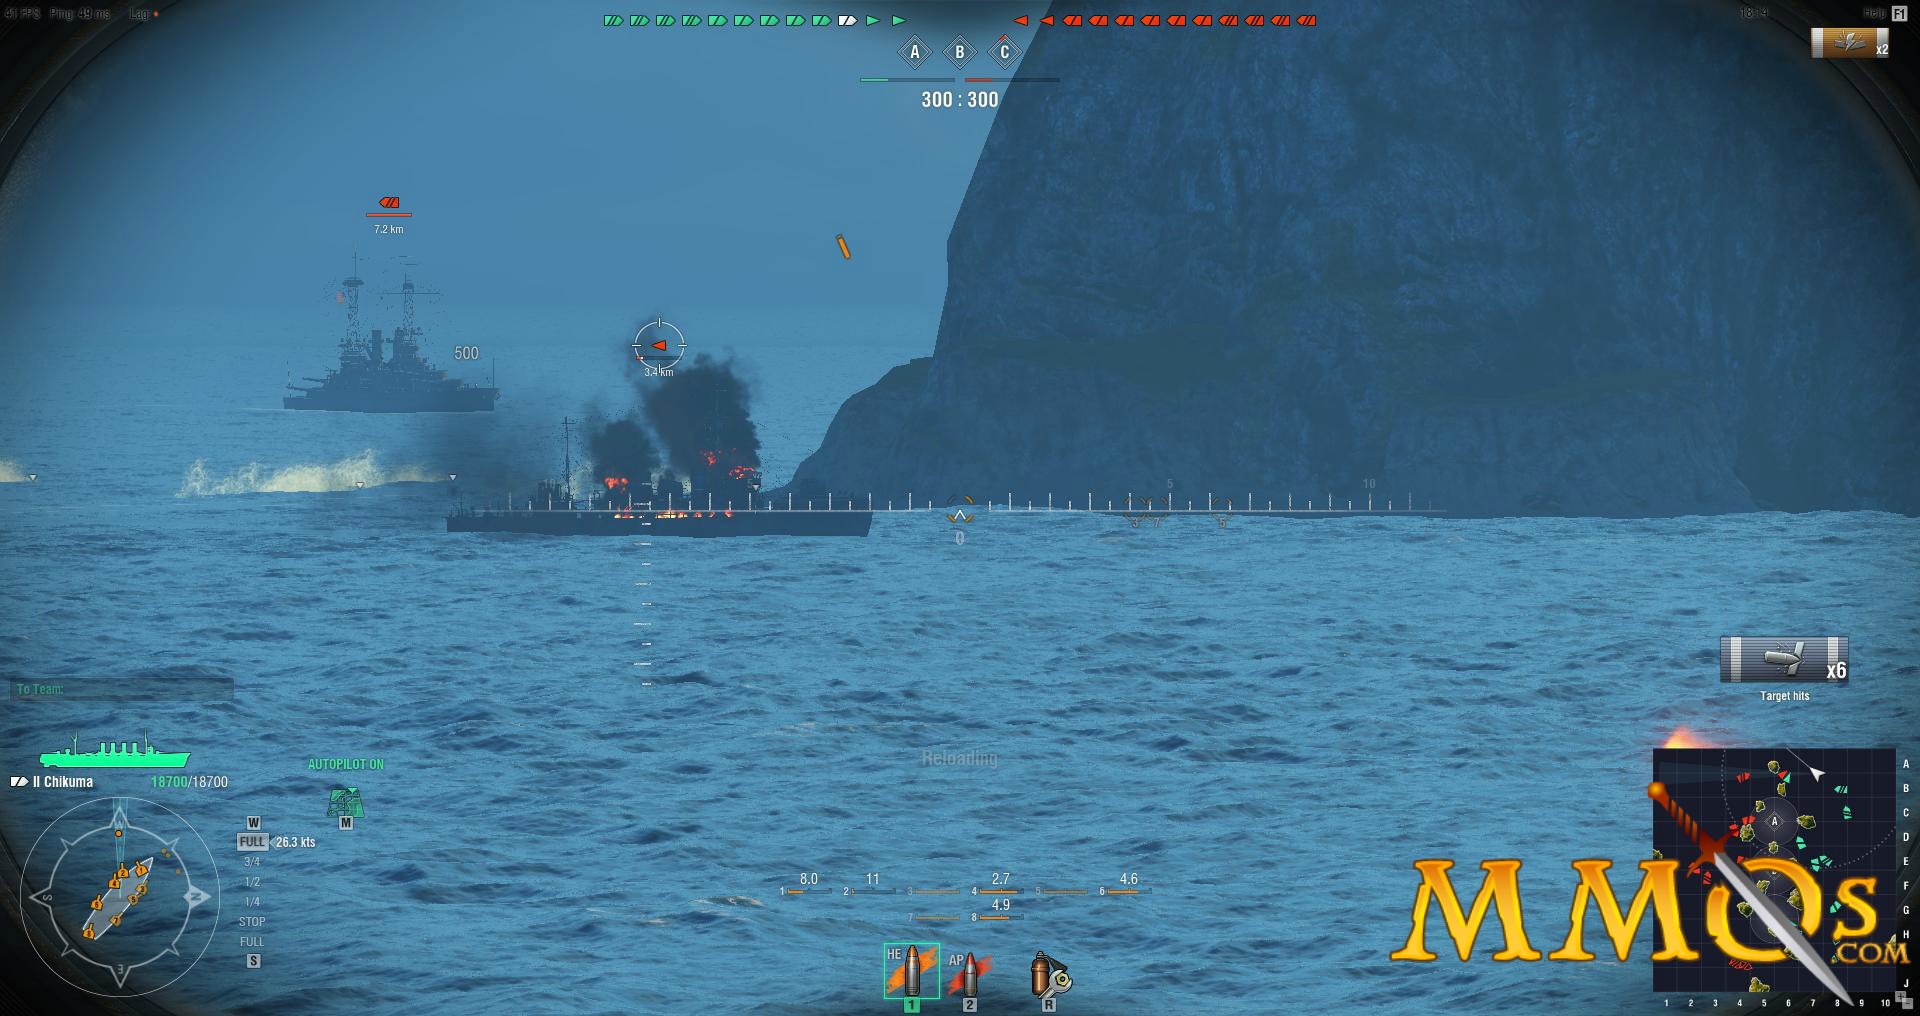 world of warships game download